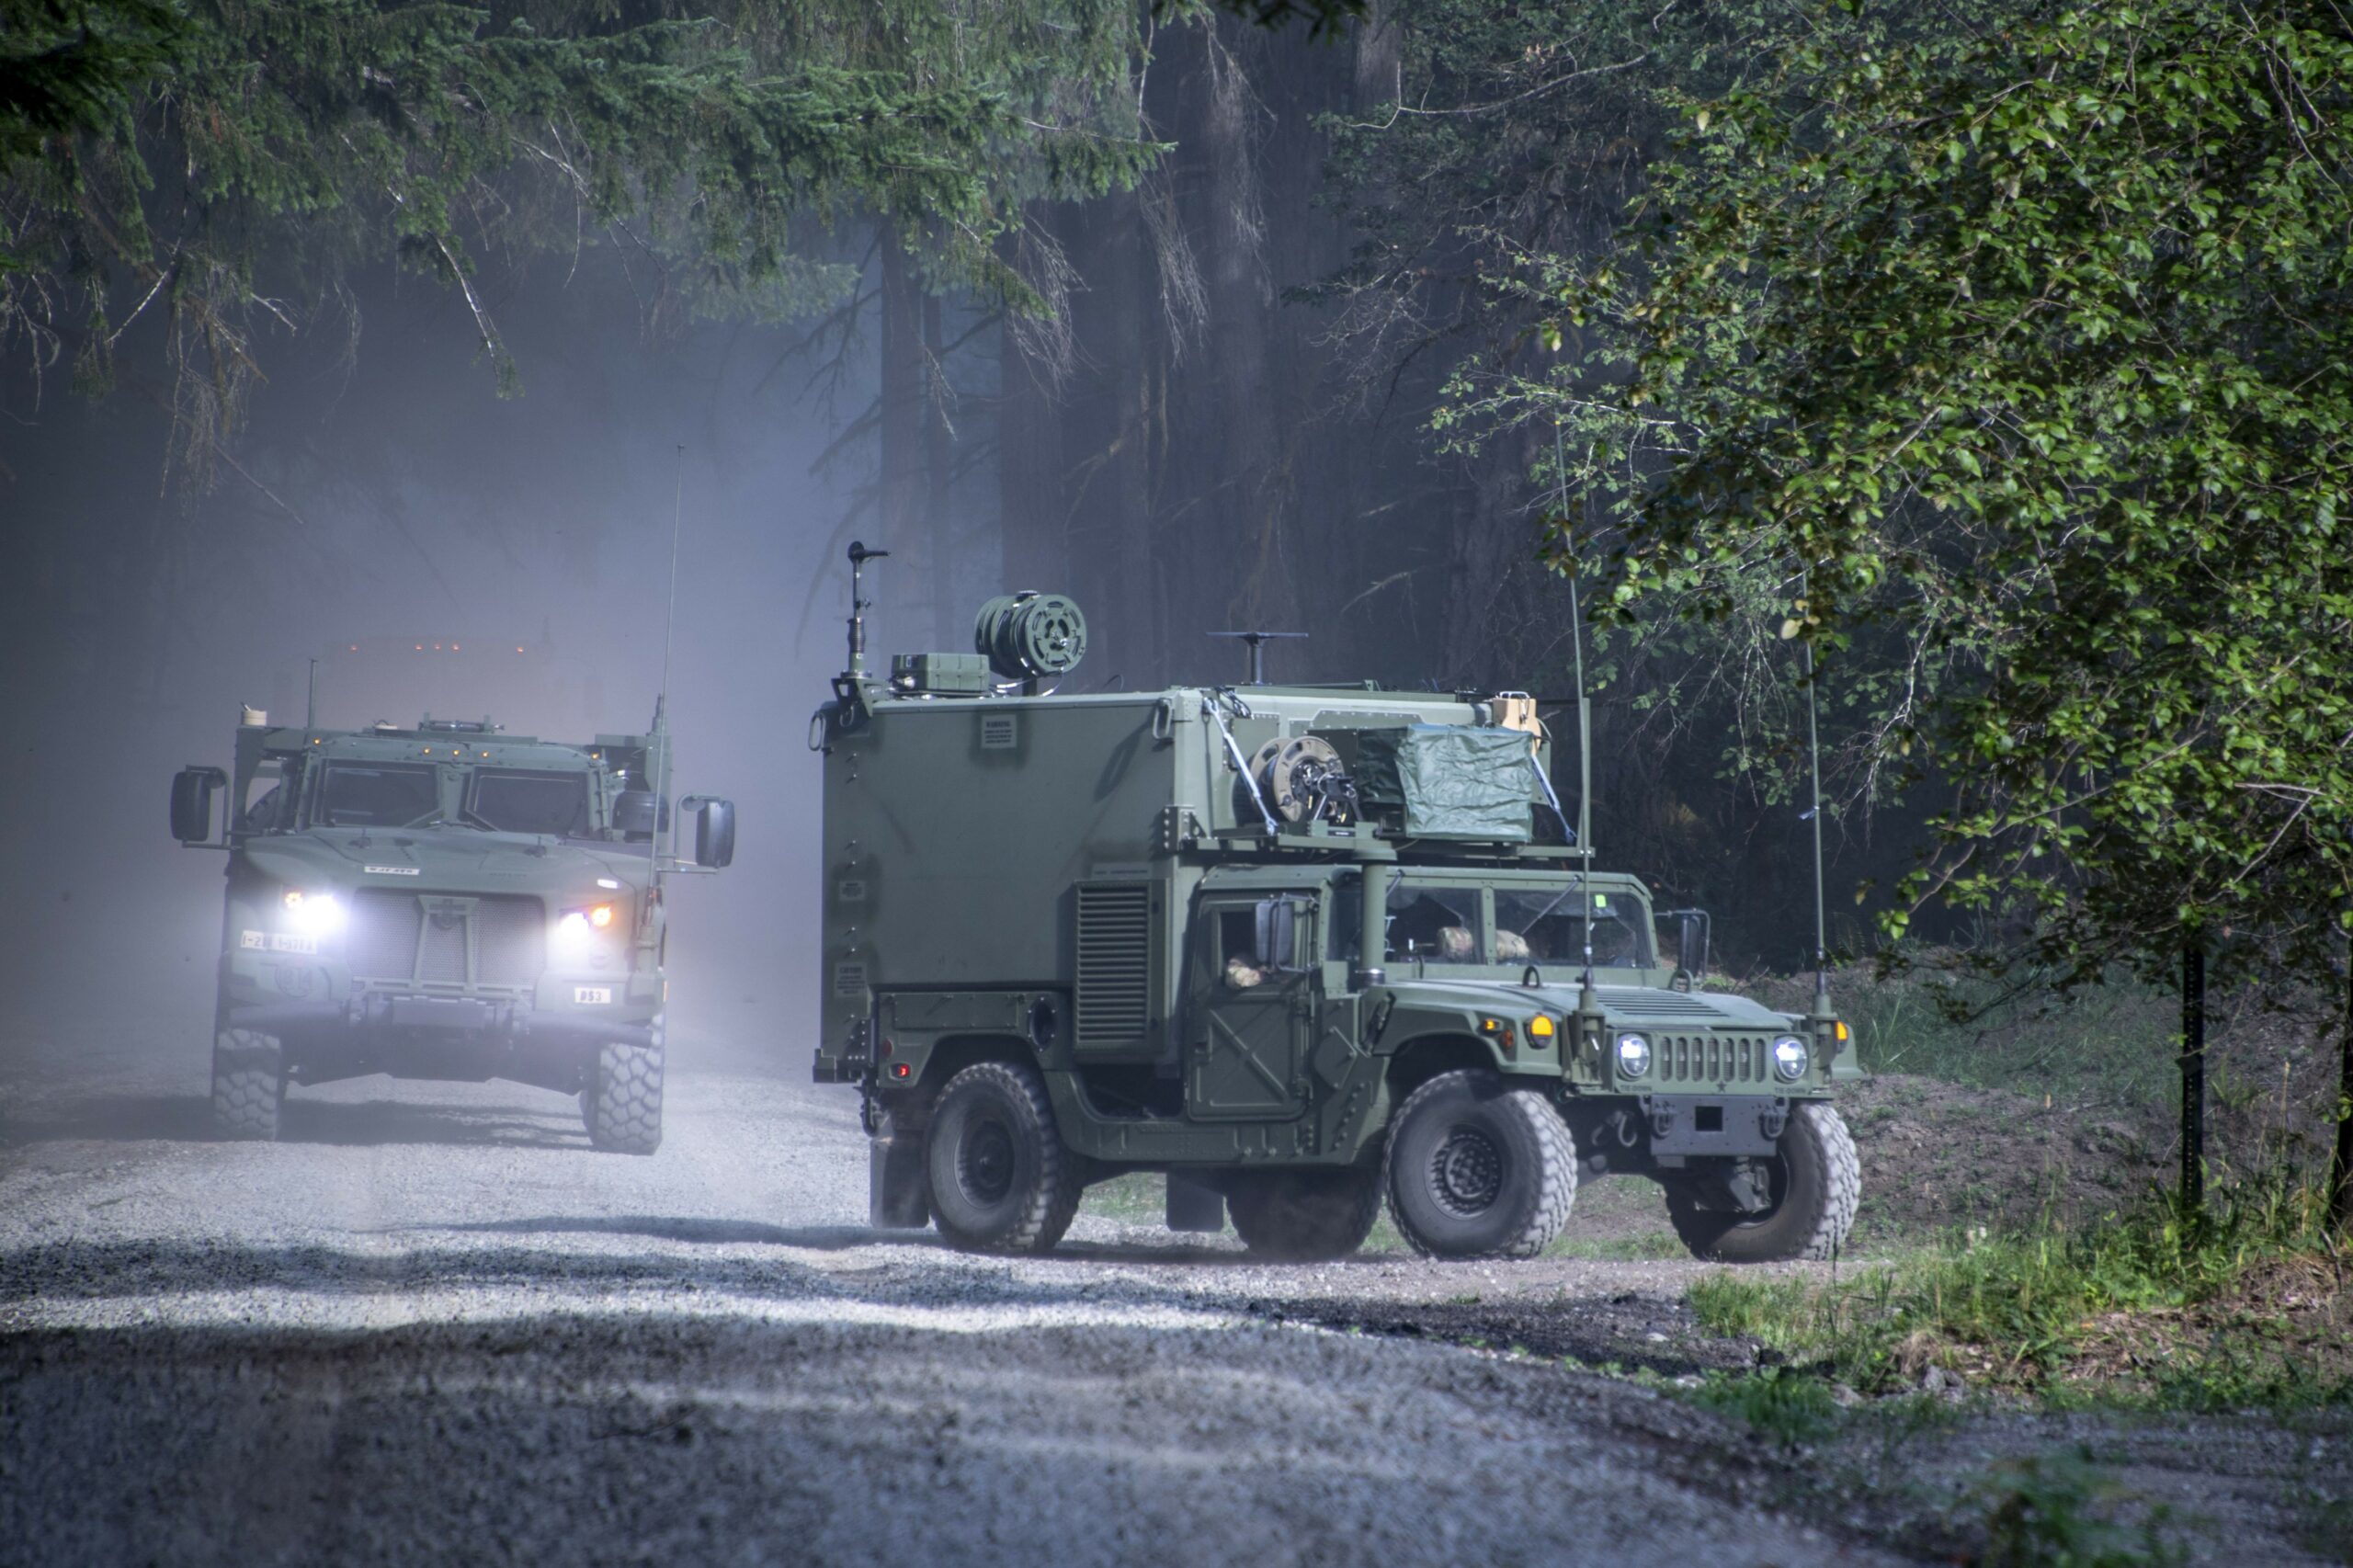 A Joint Light Tactical Vehicle (left) follows a shelter-equipped High Mobility Multi-Purpose Wheeled Vehicle of the 1st Stryker Brigade Combat Team “Ghost,” 2nd Infantry Division, into a field location at Joint Base Lewis-McChord, Washington during operational testing of the Command Post Integrated Infrastructure (CPI2). Under development in two increments, termed Increment 0 and Increment 1, the Soldiers are testing Inc. 0 of the Command Post Integrated Infrastructure (CPI2). (Tad Browning, Lead Audiovisual Production Specialist, U.S. Army Operational Test Command)